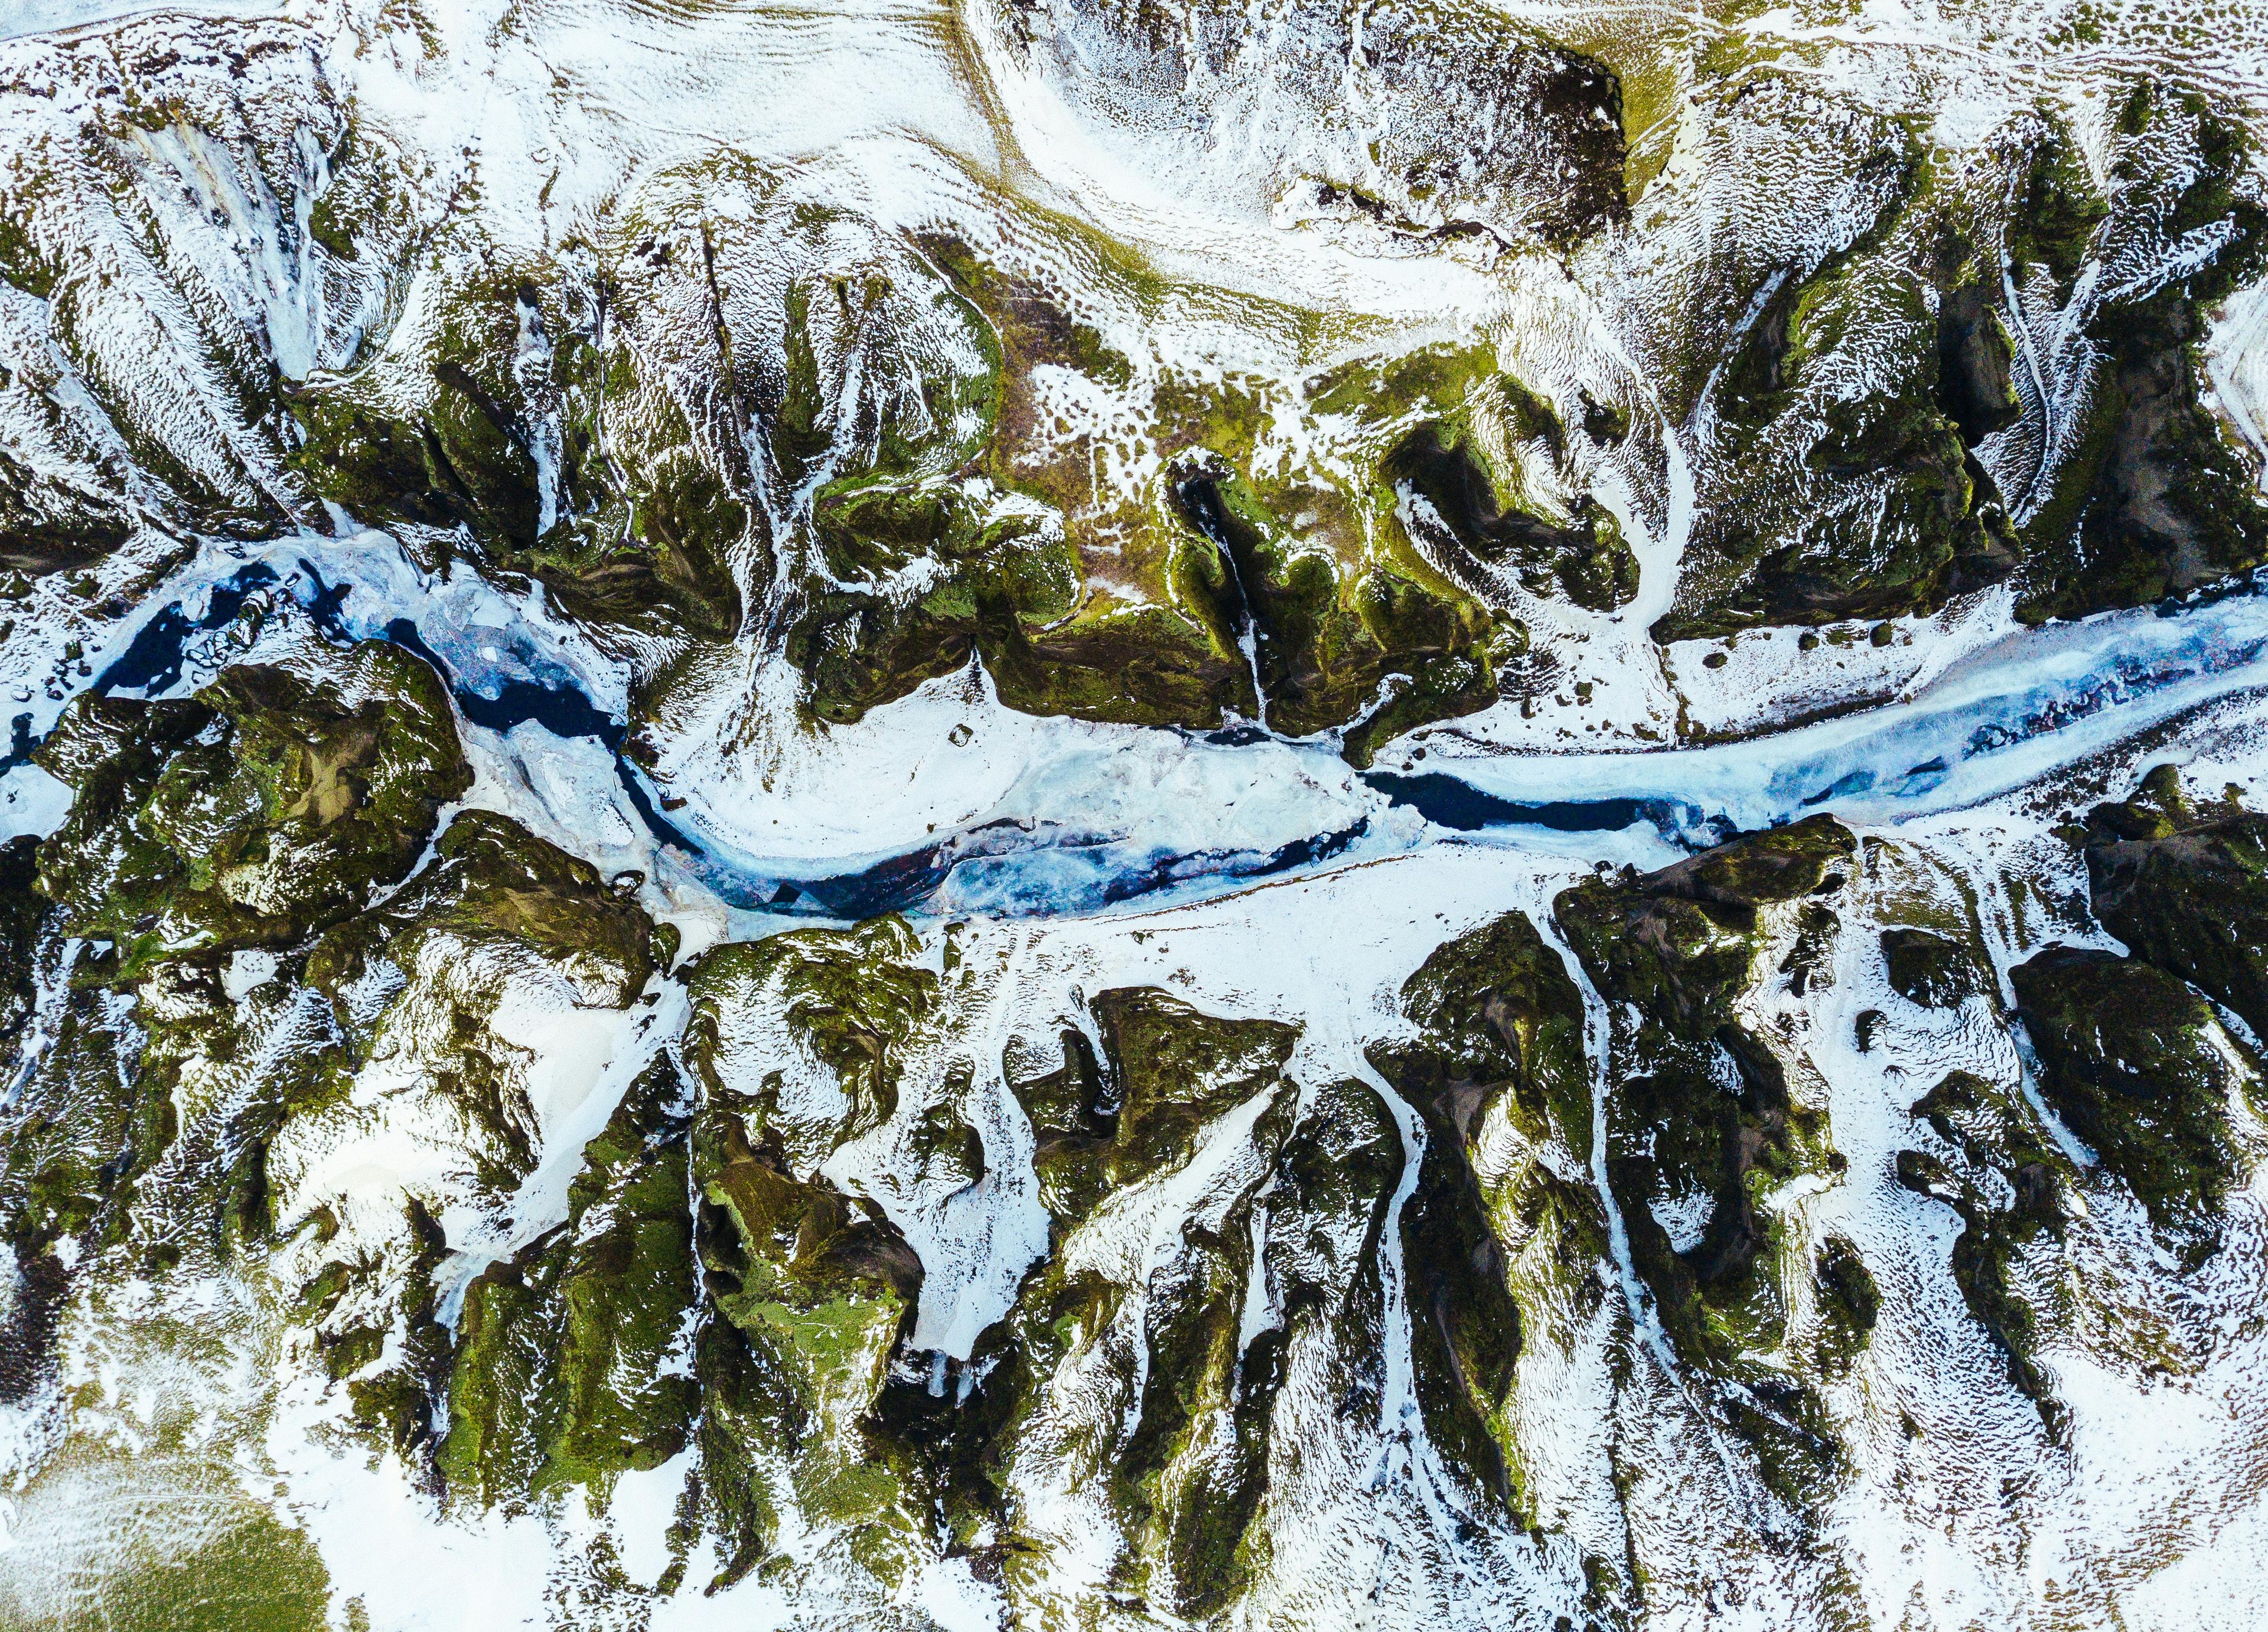 Aerial view of a winding river cutting through a snow-dusted, mossy landscape, showcasing a contrast of vibrant blue water against the earthy tones of the terrain.